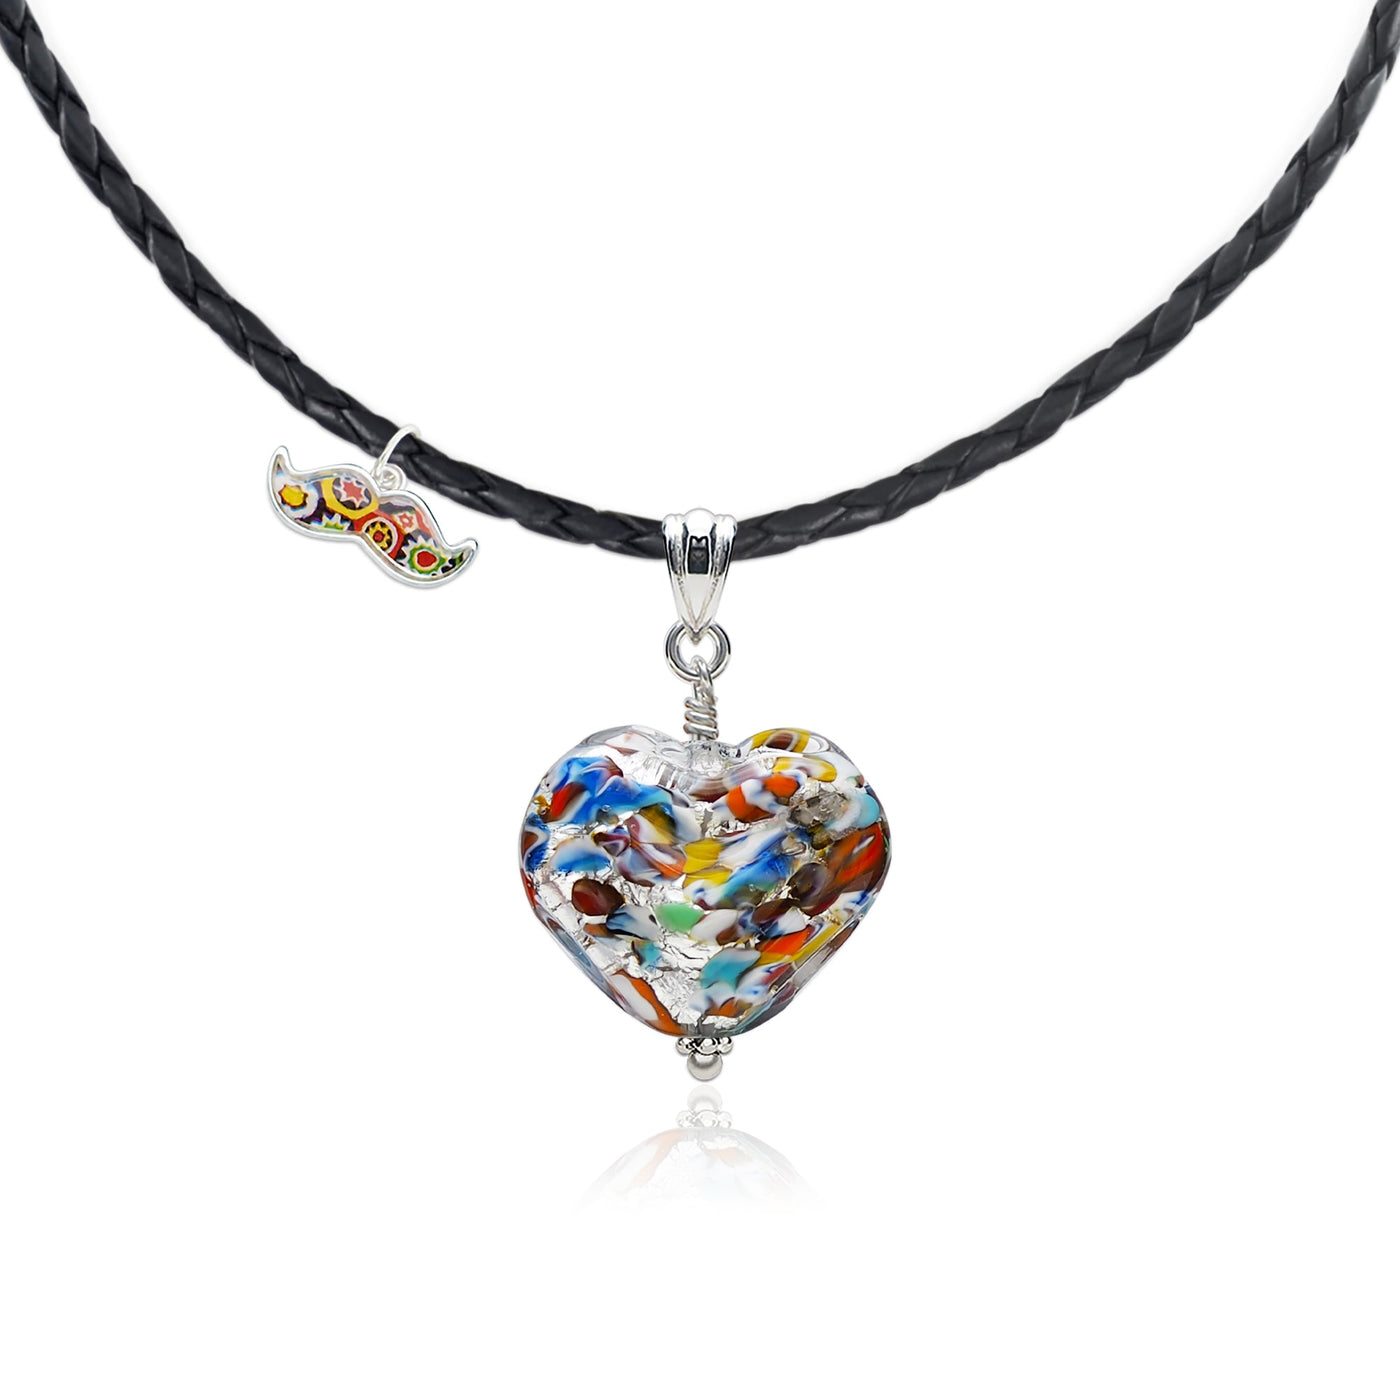 THE KISS | Classic Silver Double Heart Necklace - Leather - Pendant Necklace